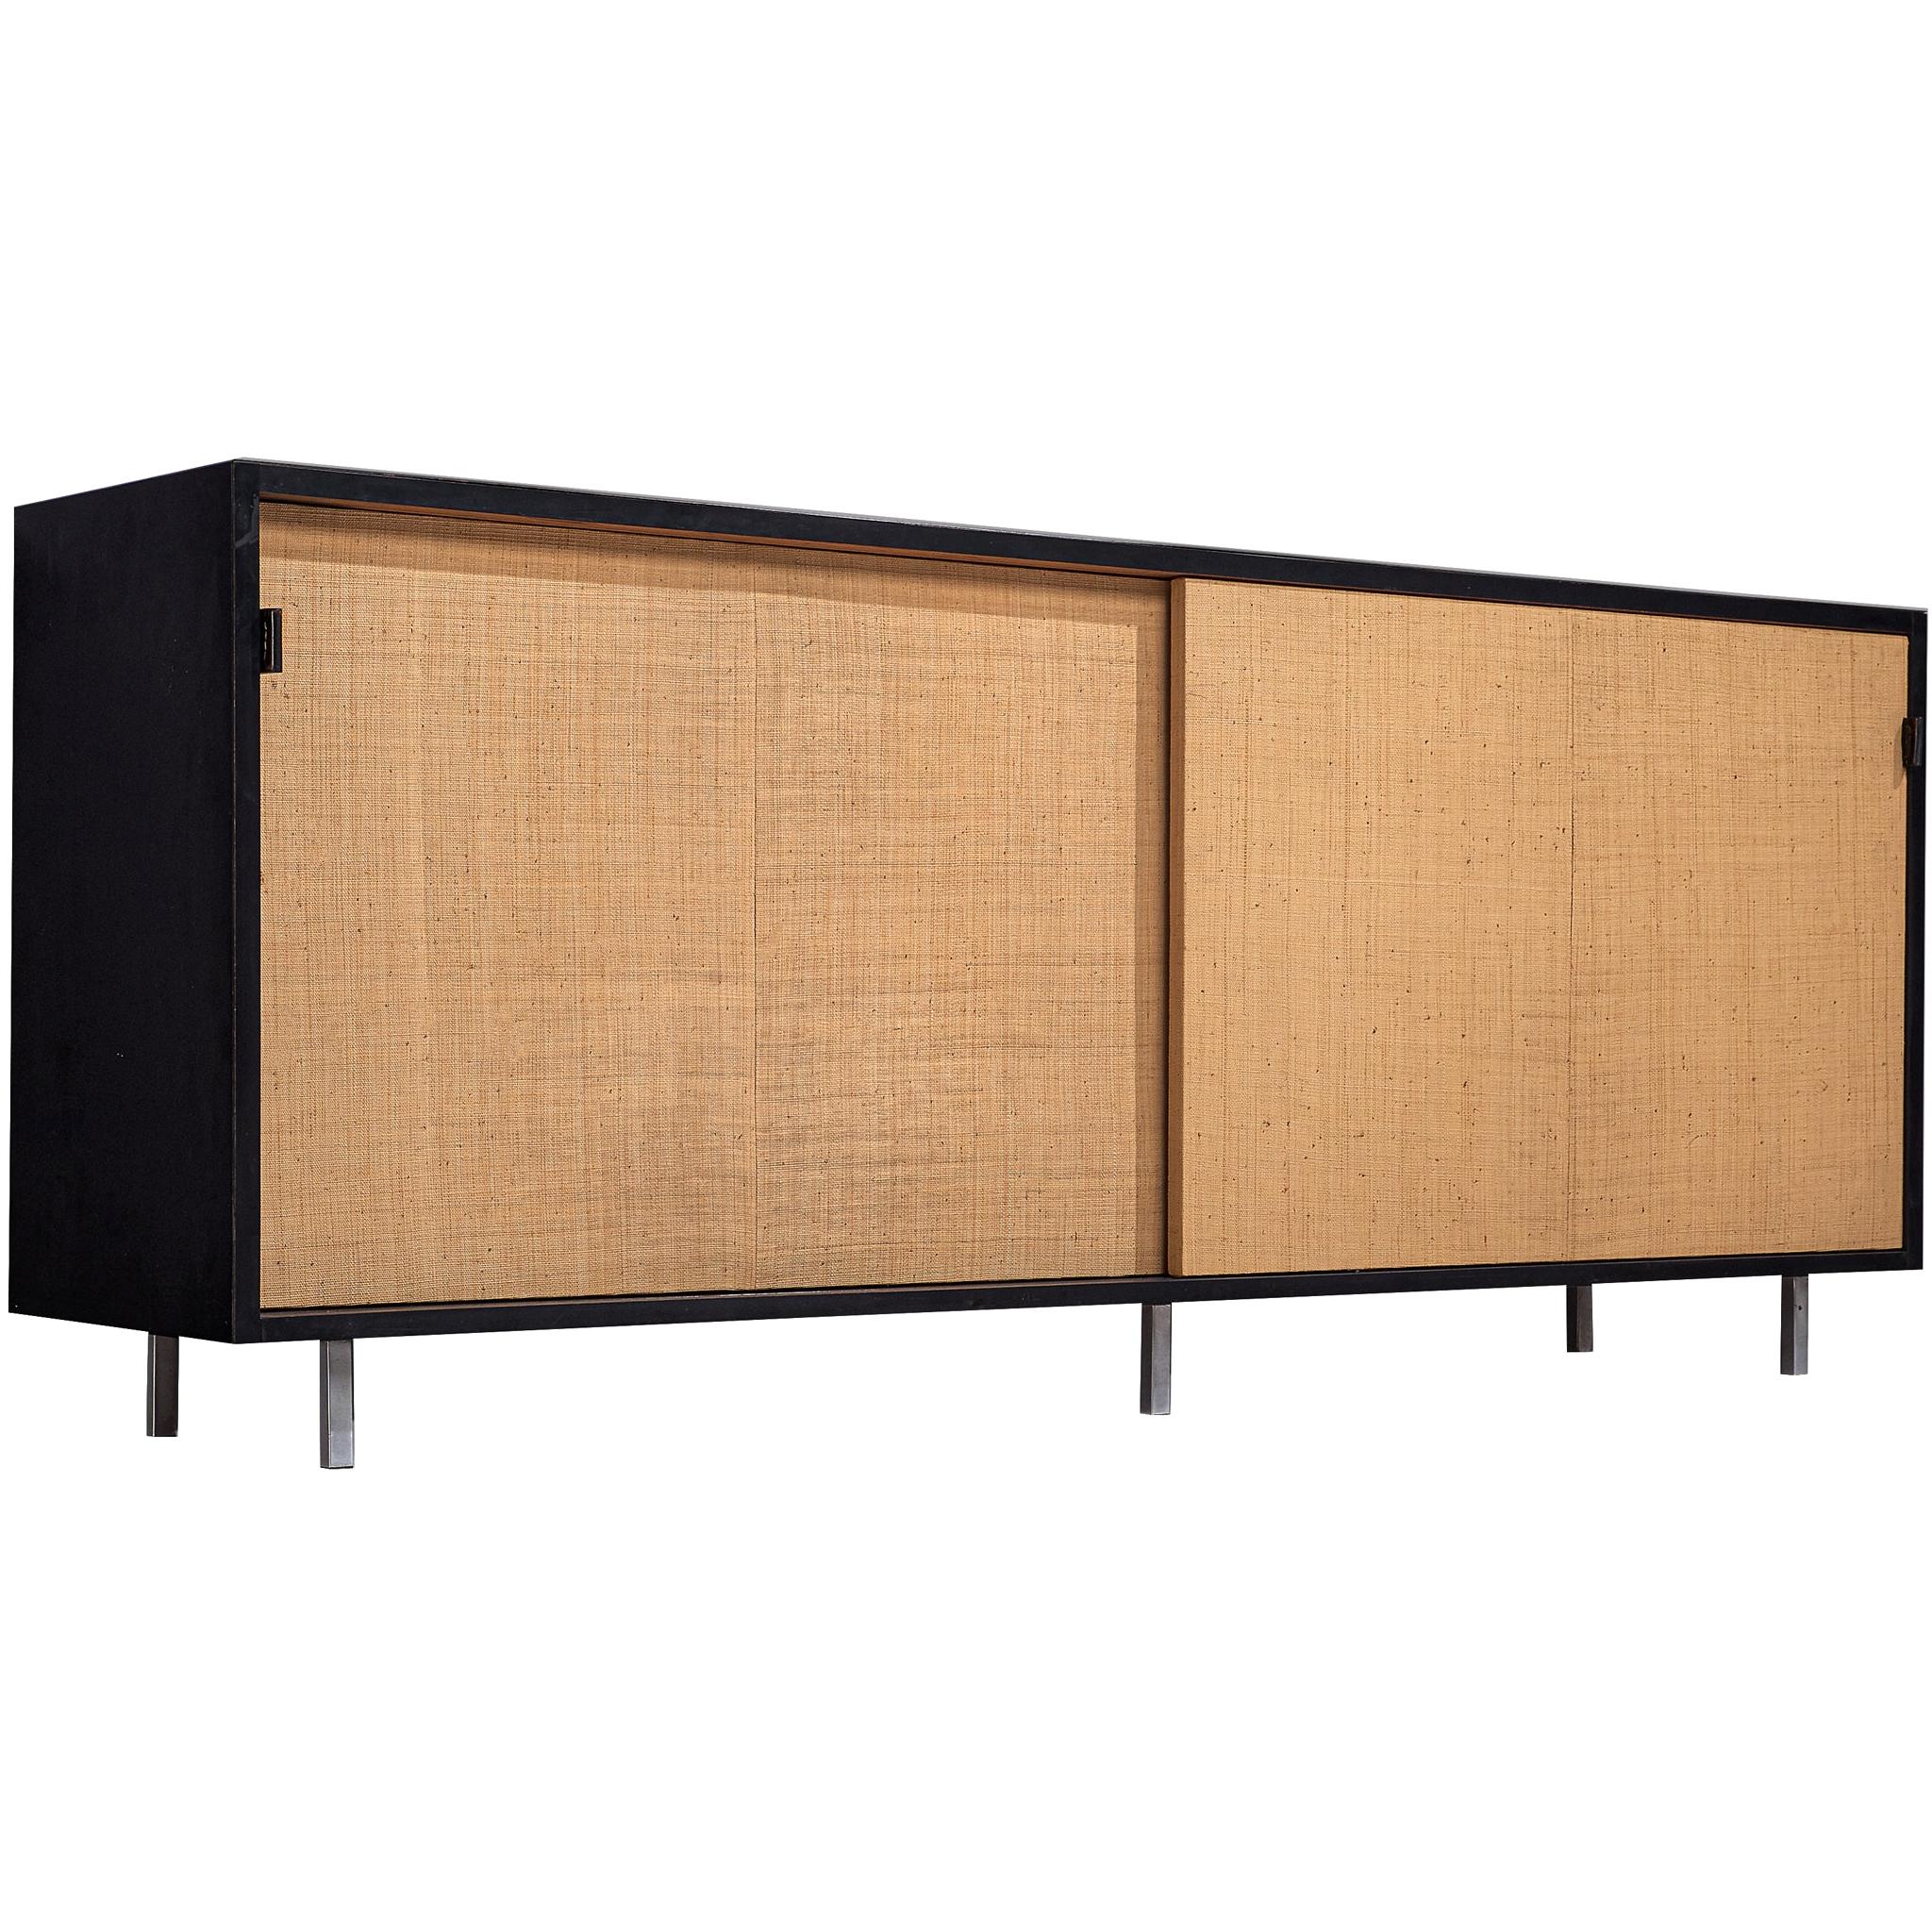 For Lucy: Early Florence Knoll Credenza with Cane Sliding Doors